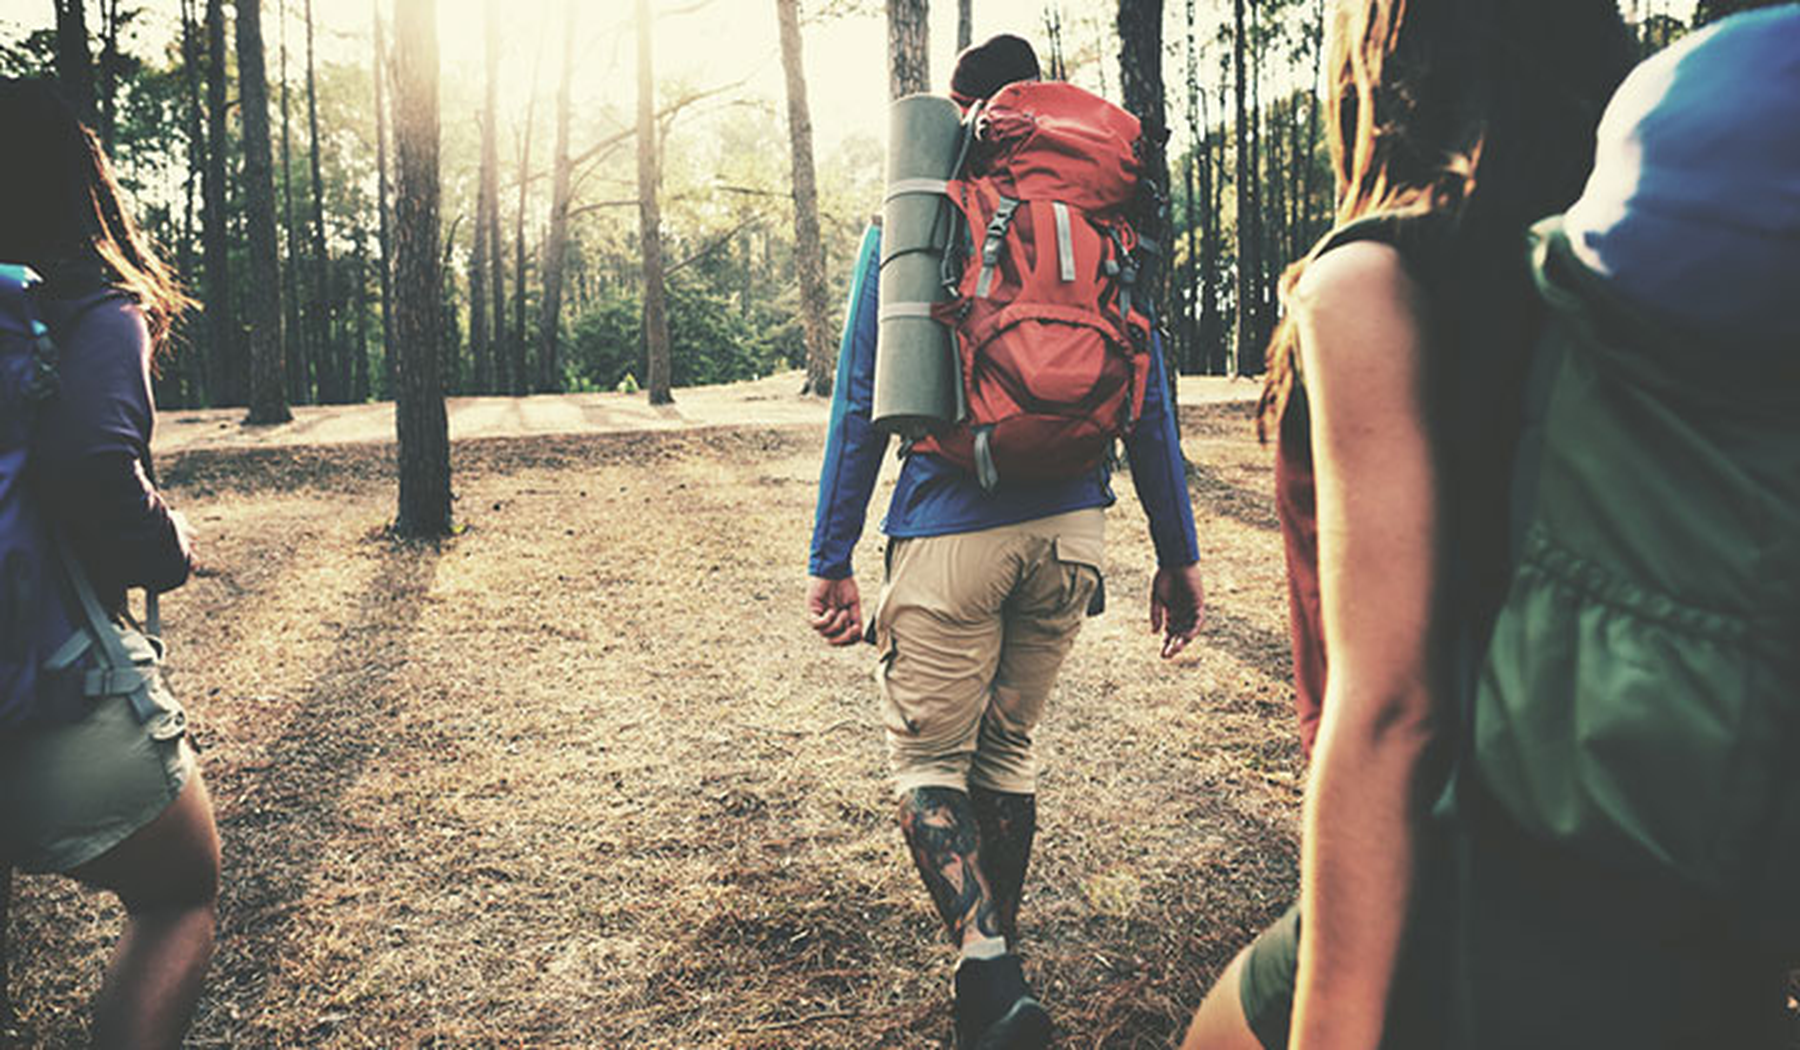 A group of backpackers walking through a forest